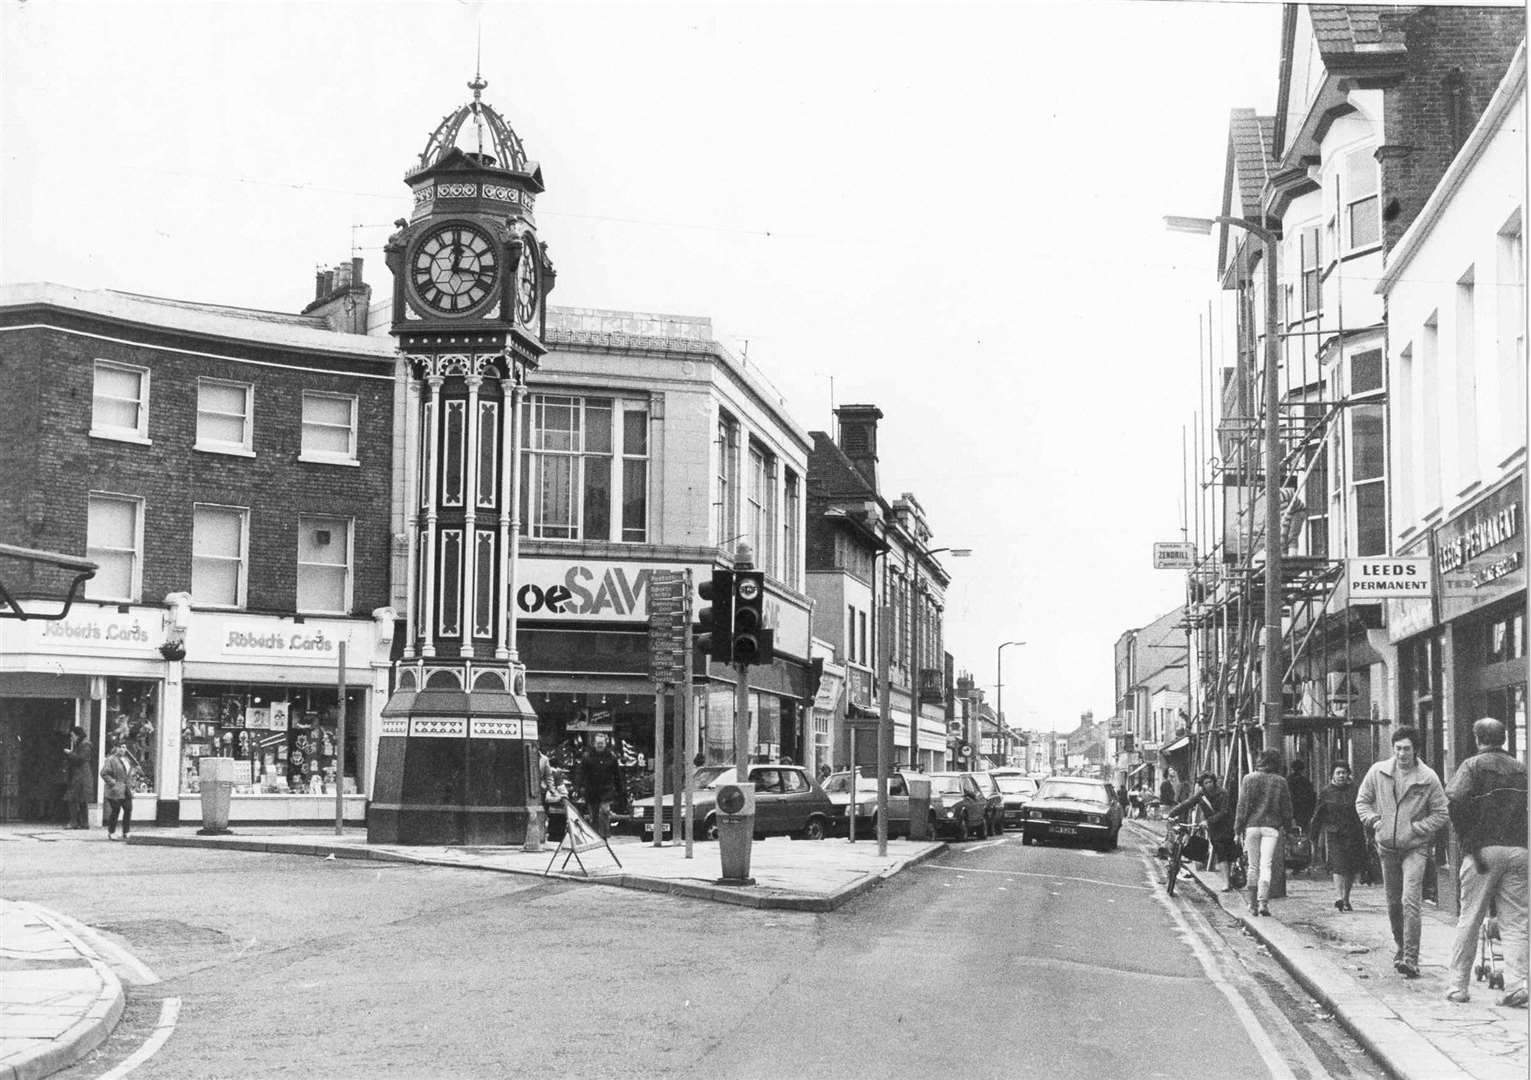 Sheerness Clock Tower pictured in March 1986